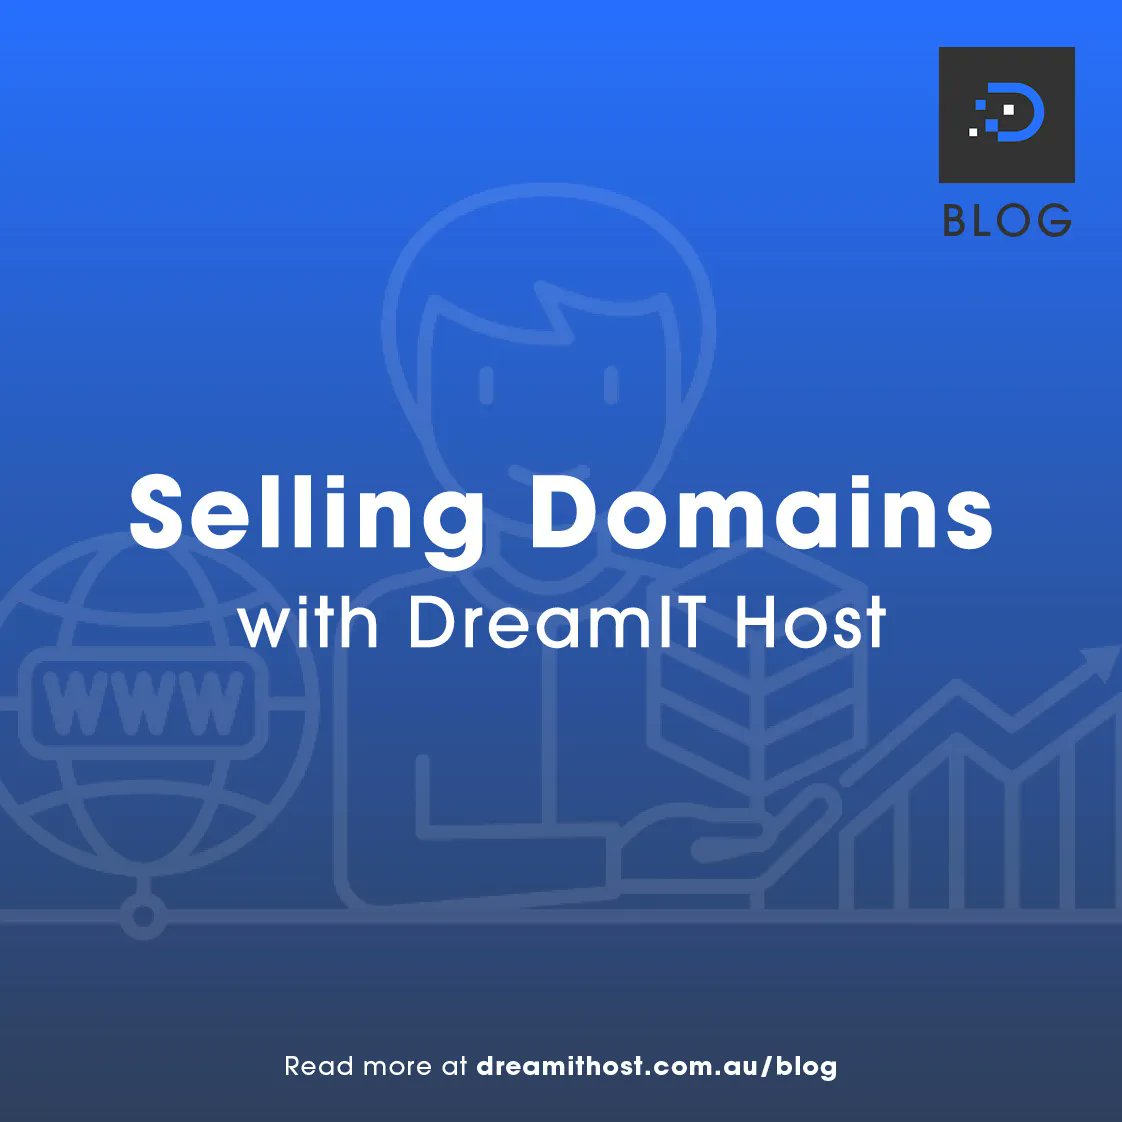 NEW BLOG POST: Selling Domains with DreamIT Host. Read more at: dreamithost.com.au/selling-domain…
-
#dreamithost #dreamit #blog #blogpost #domains #domainreselling